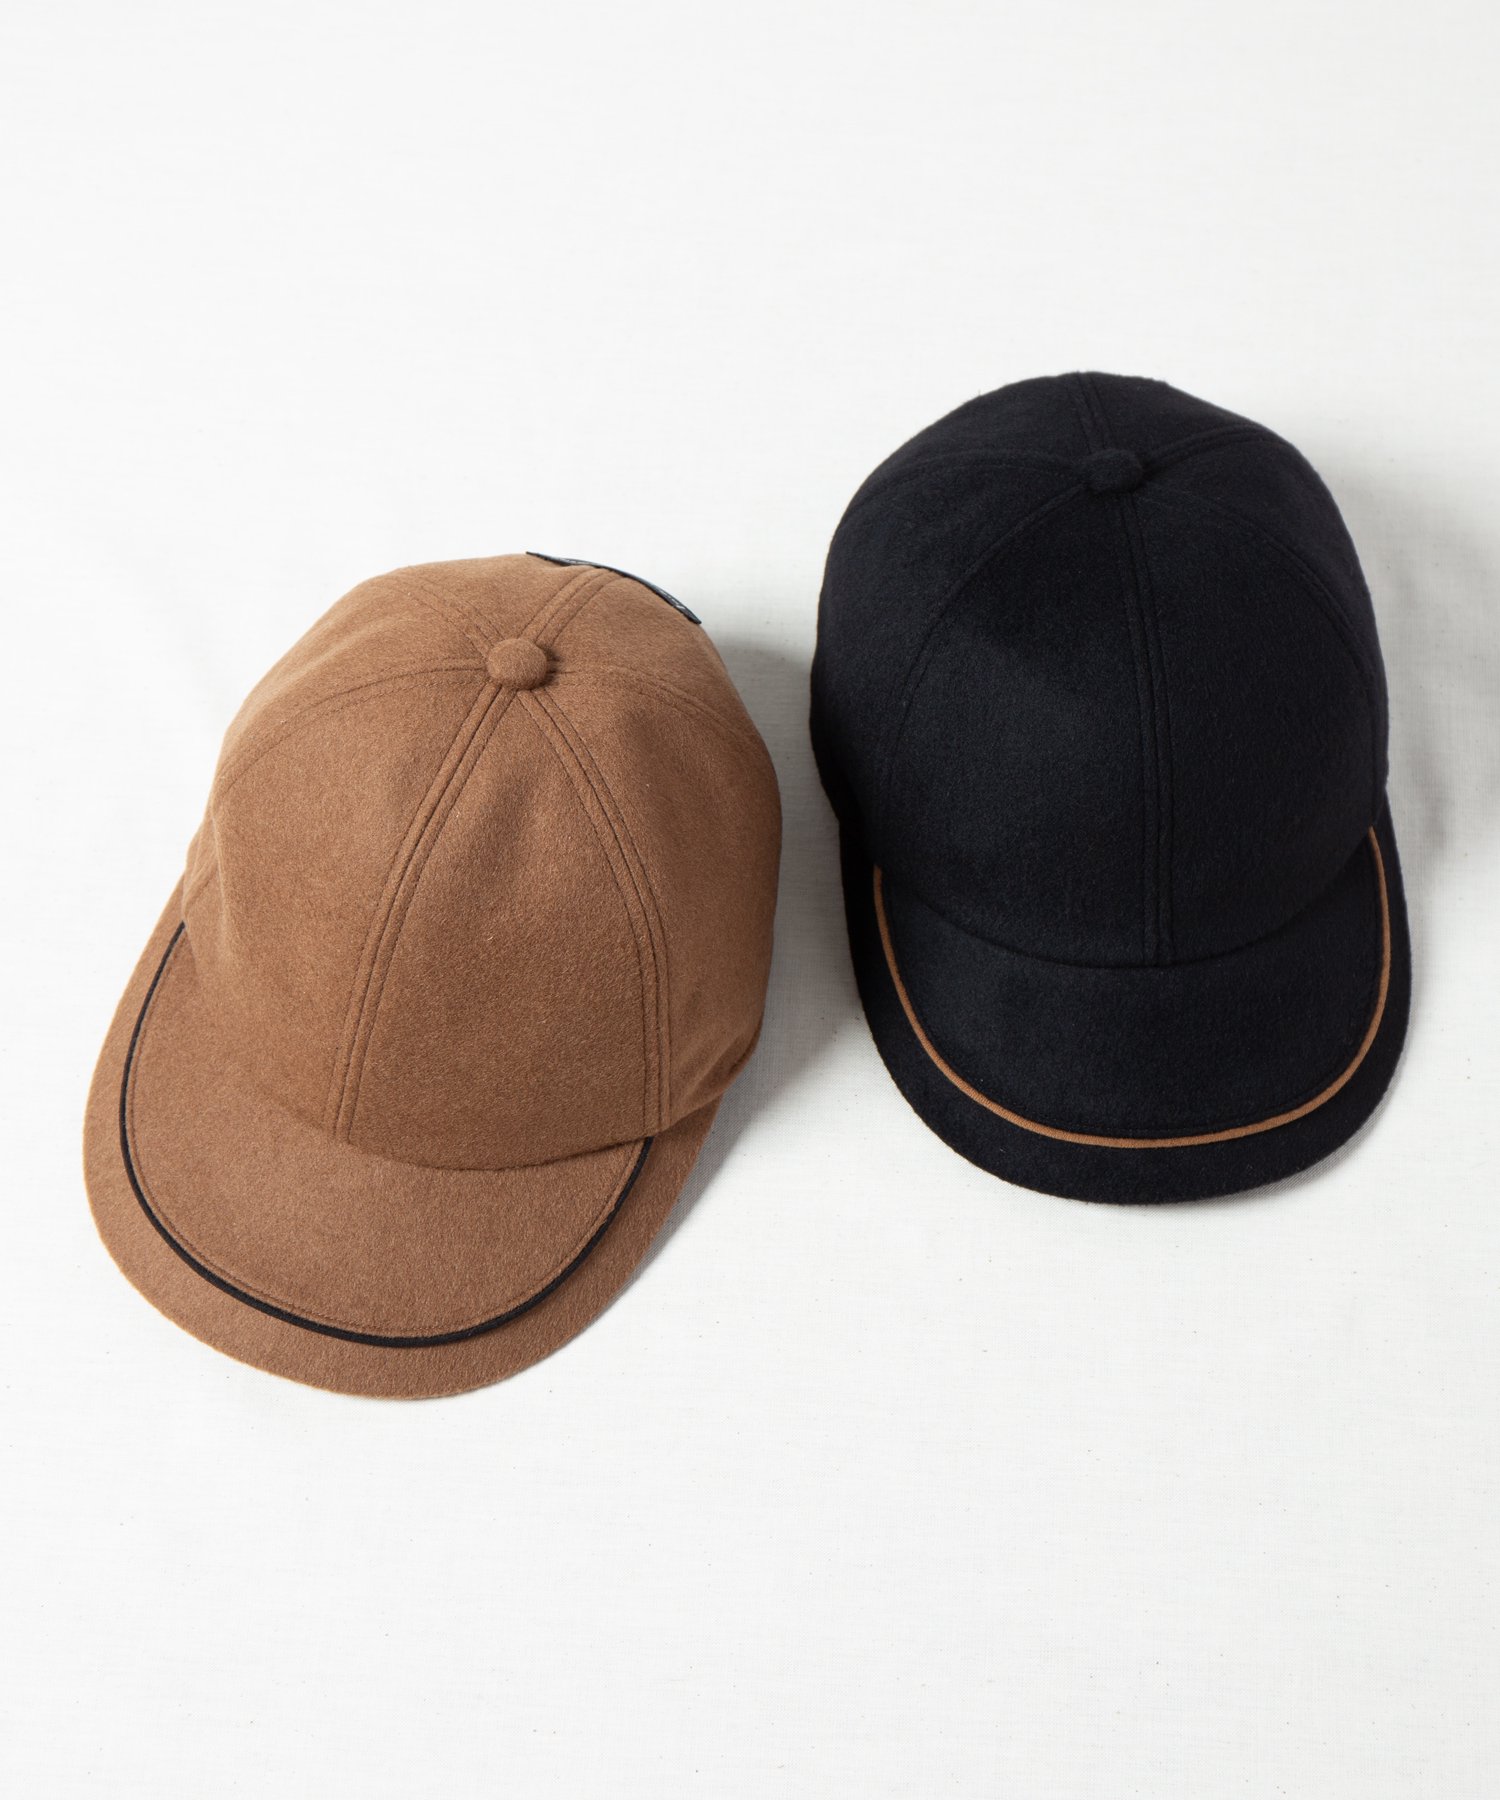 <img class='new_mark_img1' src='https://img.shop-pro.jp/img/new/icons20.gif' style='border:none;display:inline;margin:0px;padding:0px;width:auto;' />Indietro Association Cashmere Line Brim Cap 044カシミヤ混ウールラインブリムキャップ